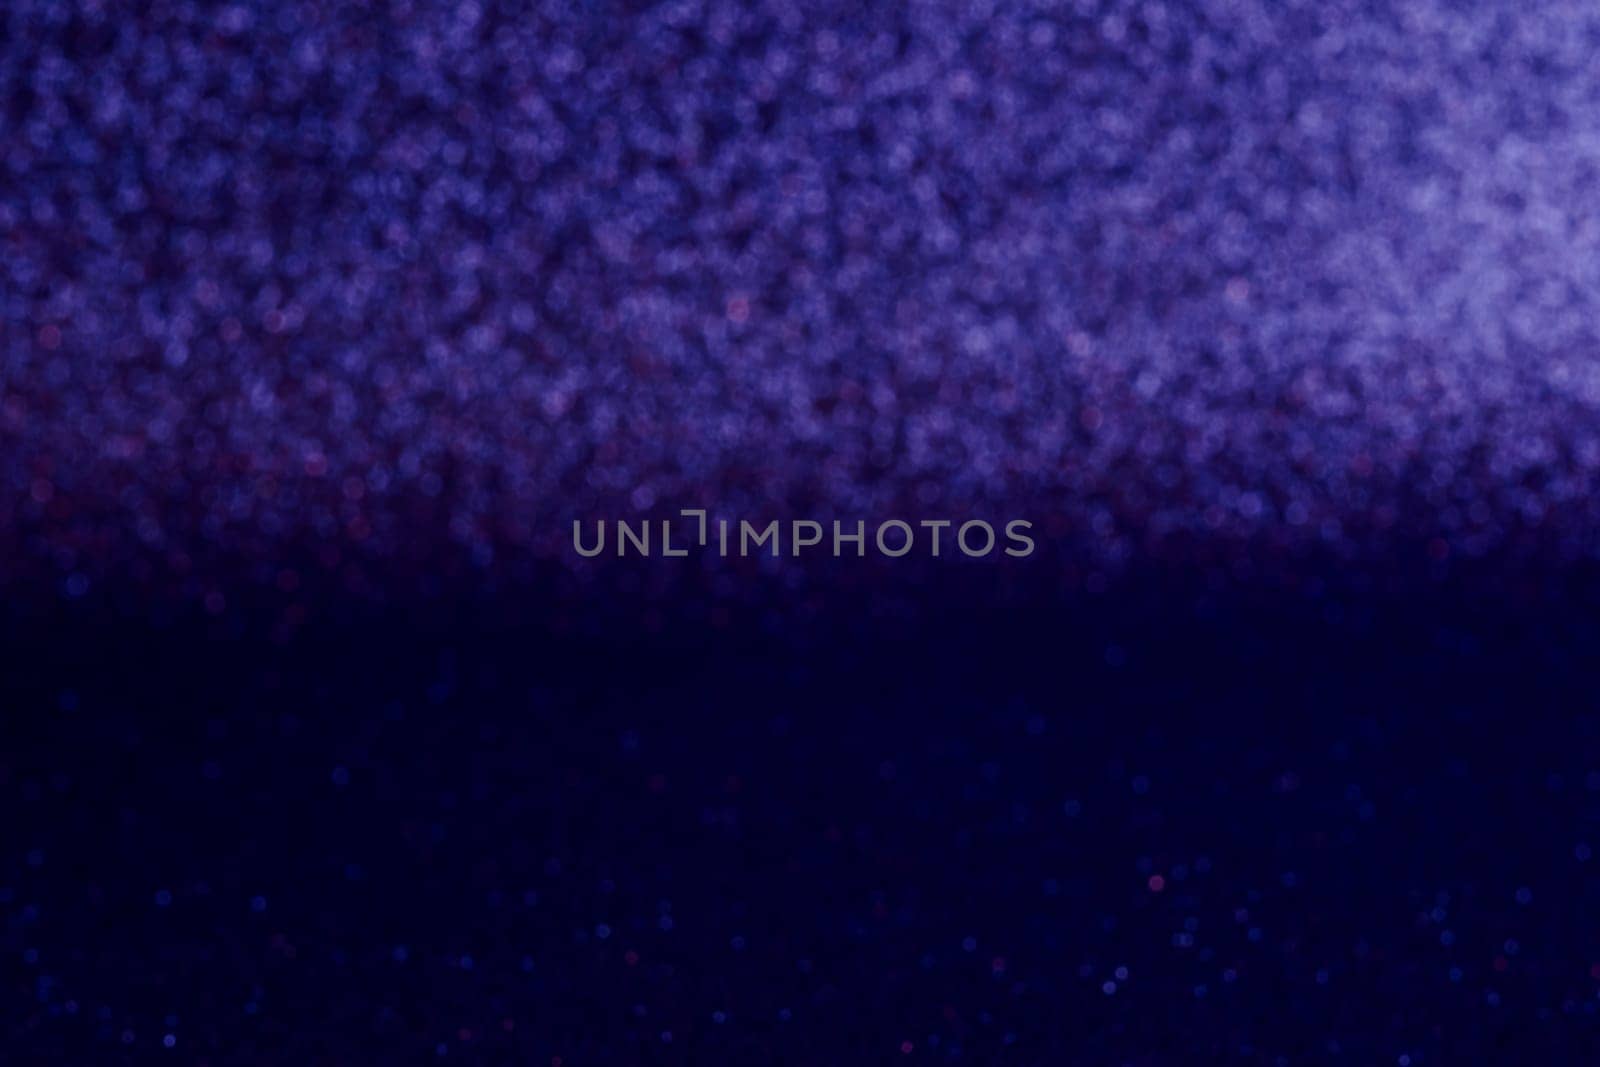 A blurry image of a blue background with purple and red dots. The image has a dreamy, ethereal quality to it